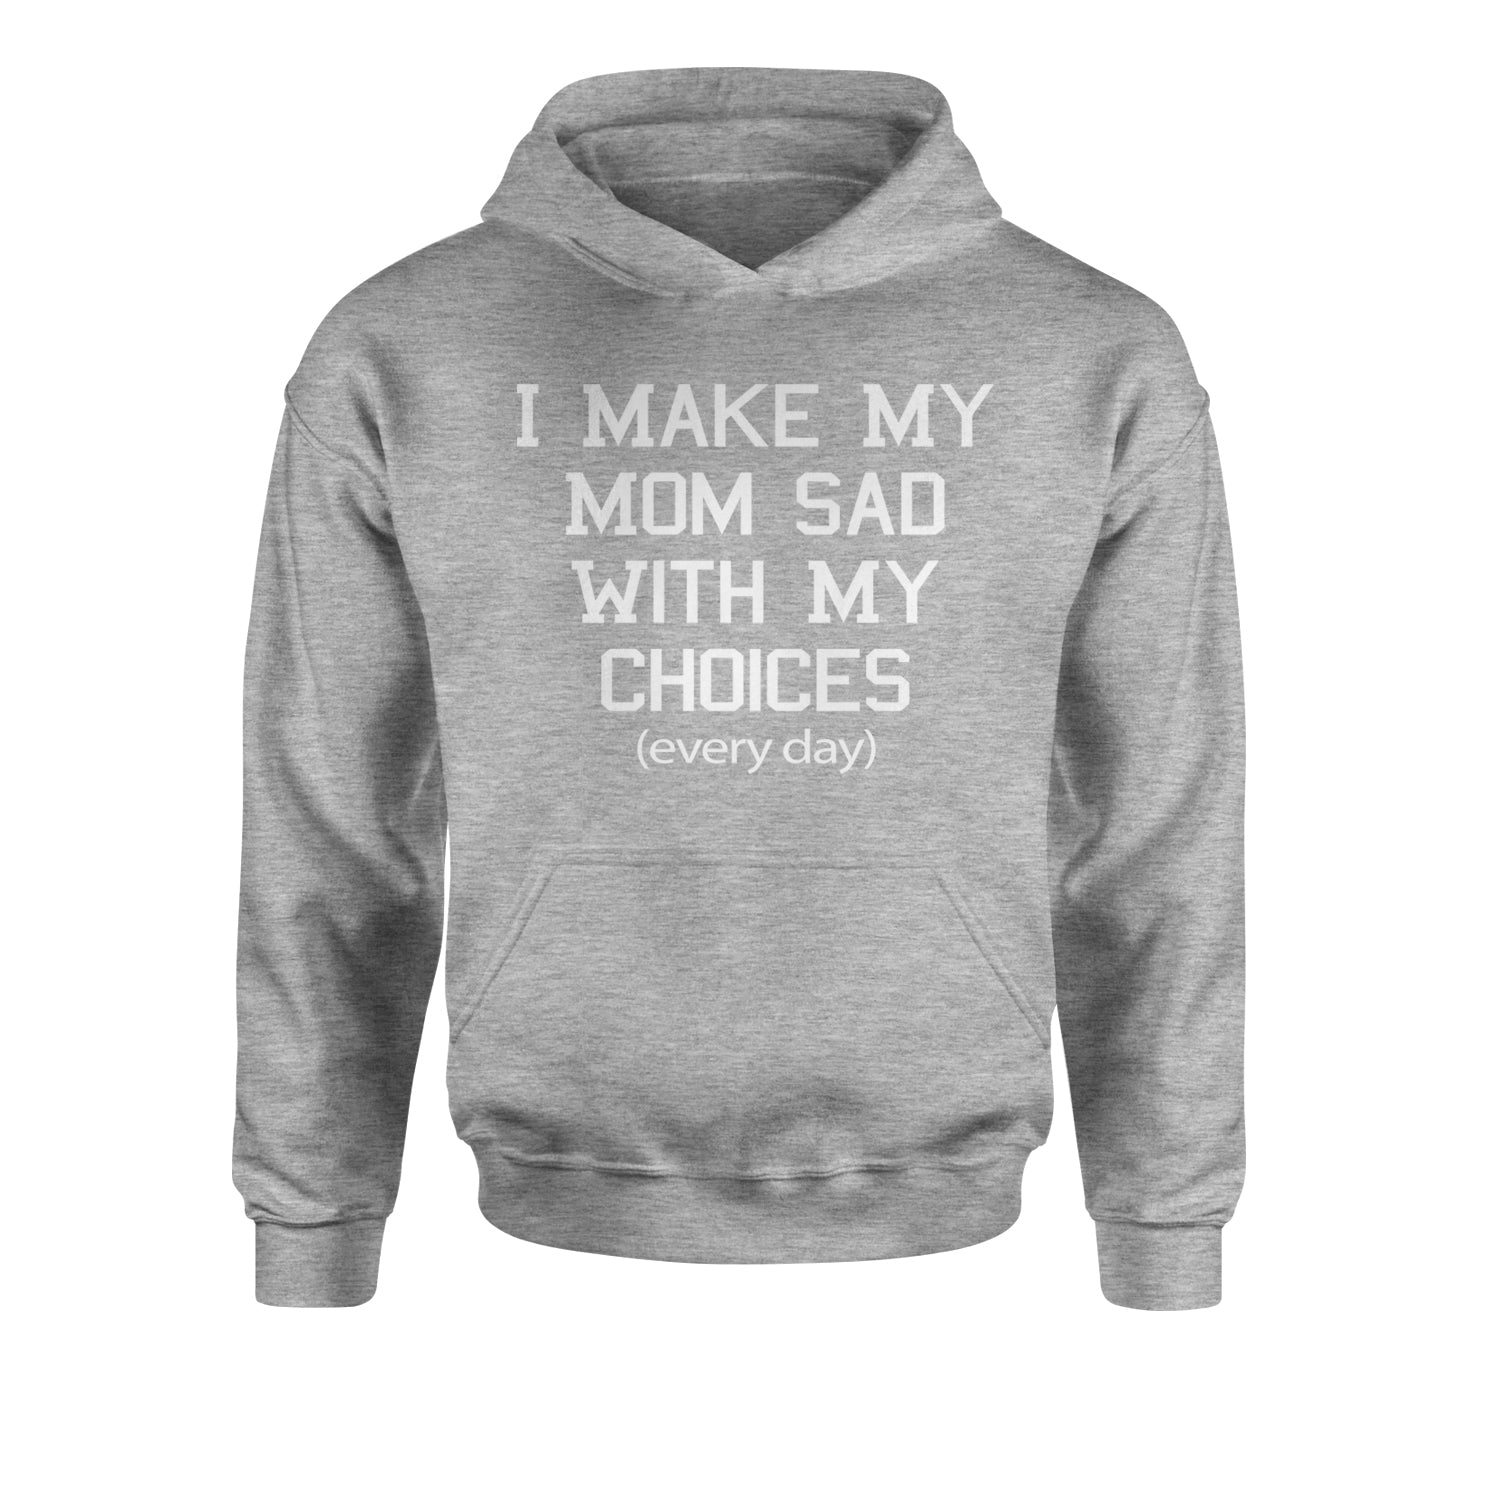 I Make My Mom Sad With My Choices Every Day Youth-Sized Hoodie funny, ironic, meme by Expression Tees